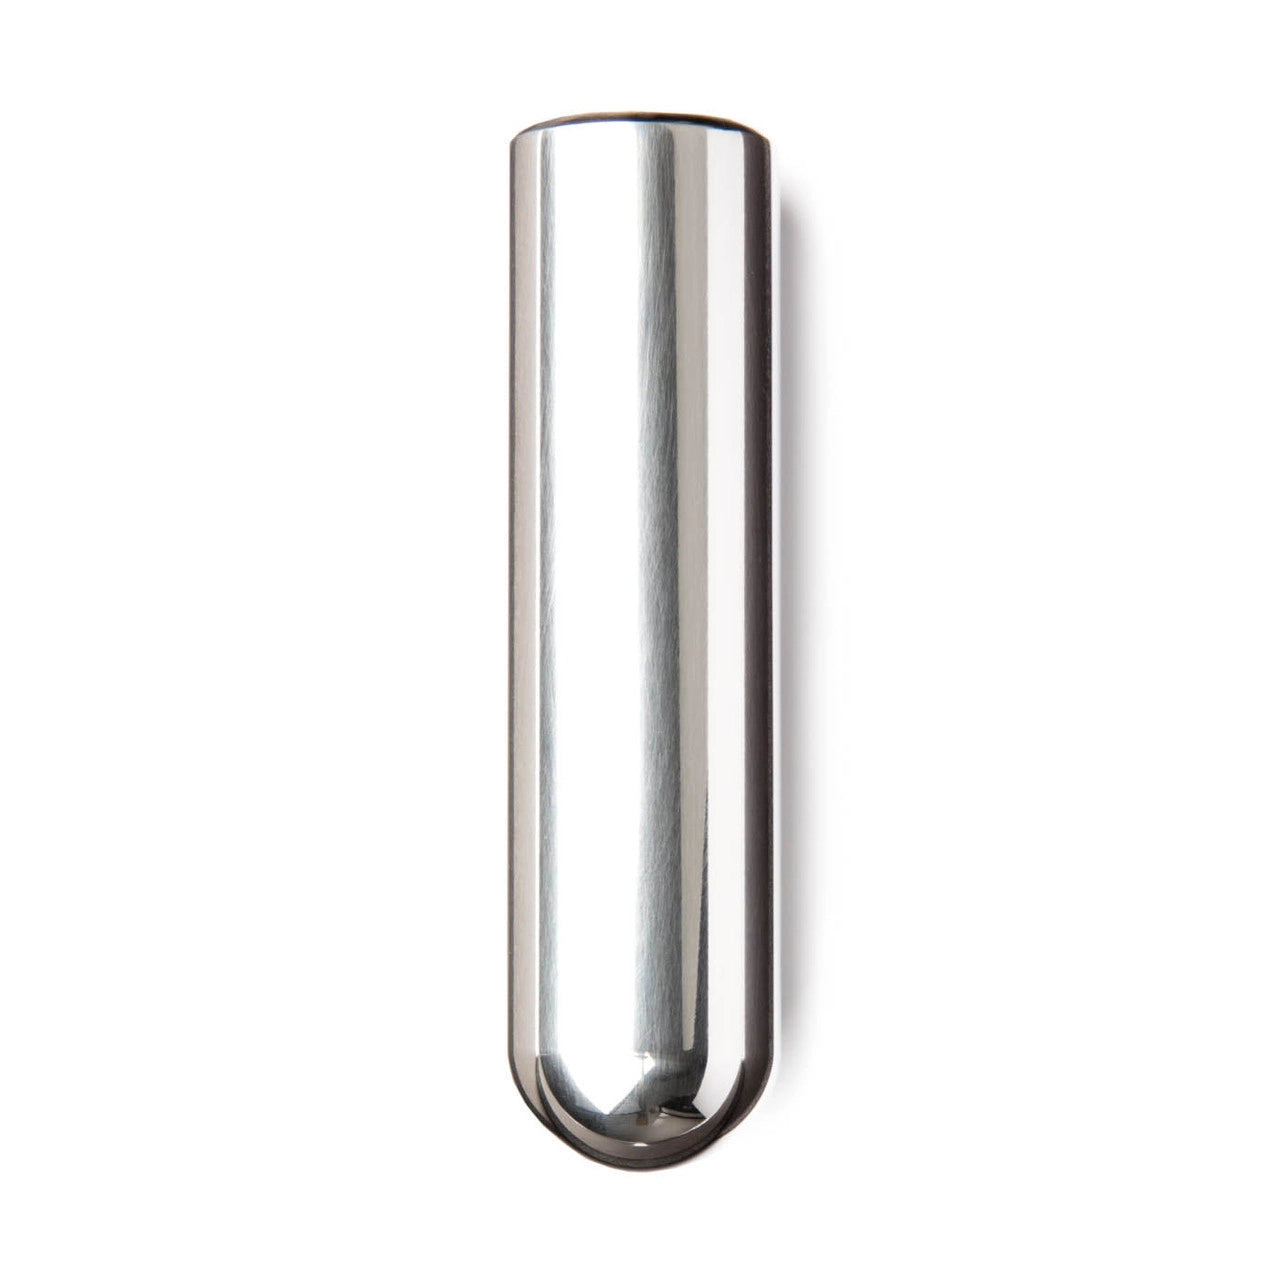 Dunlop 921 Stainless Steel Tonebar 3.75in X 1.00in